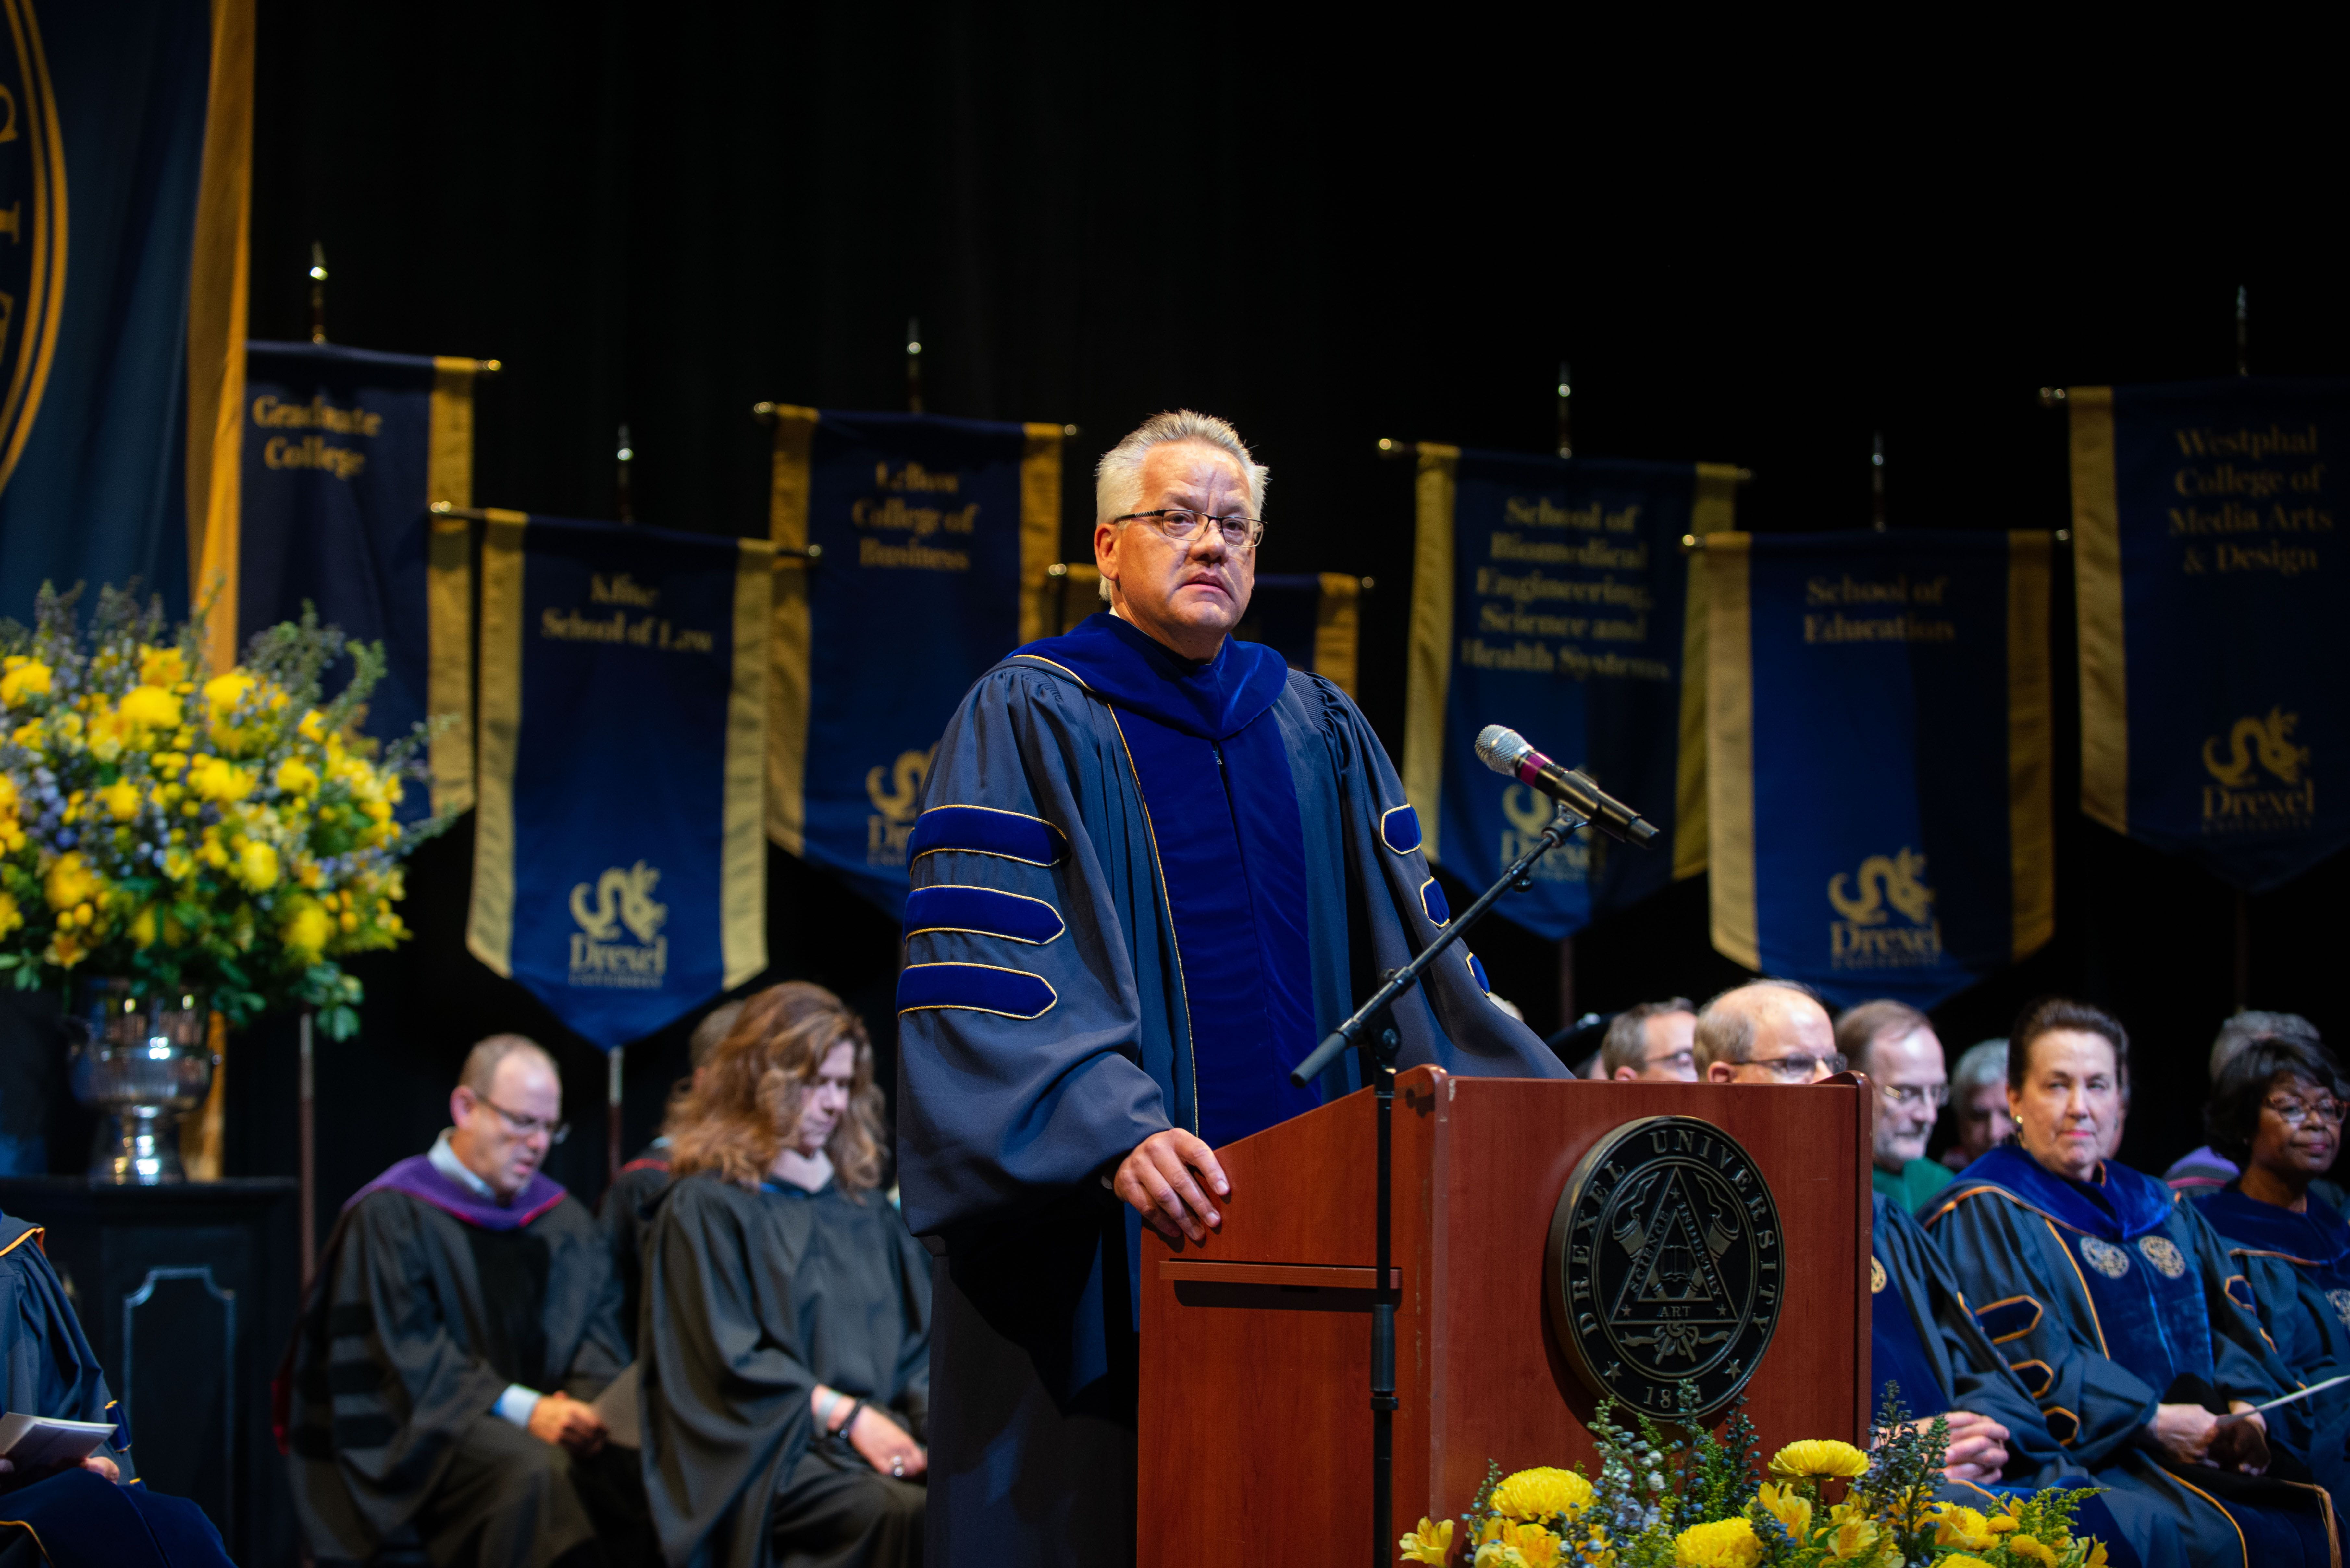 Paul Jensen stands at the podium at Drexel's 2022 Convocation ceremony. Photo credit: Shira Yudkoff Photography.